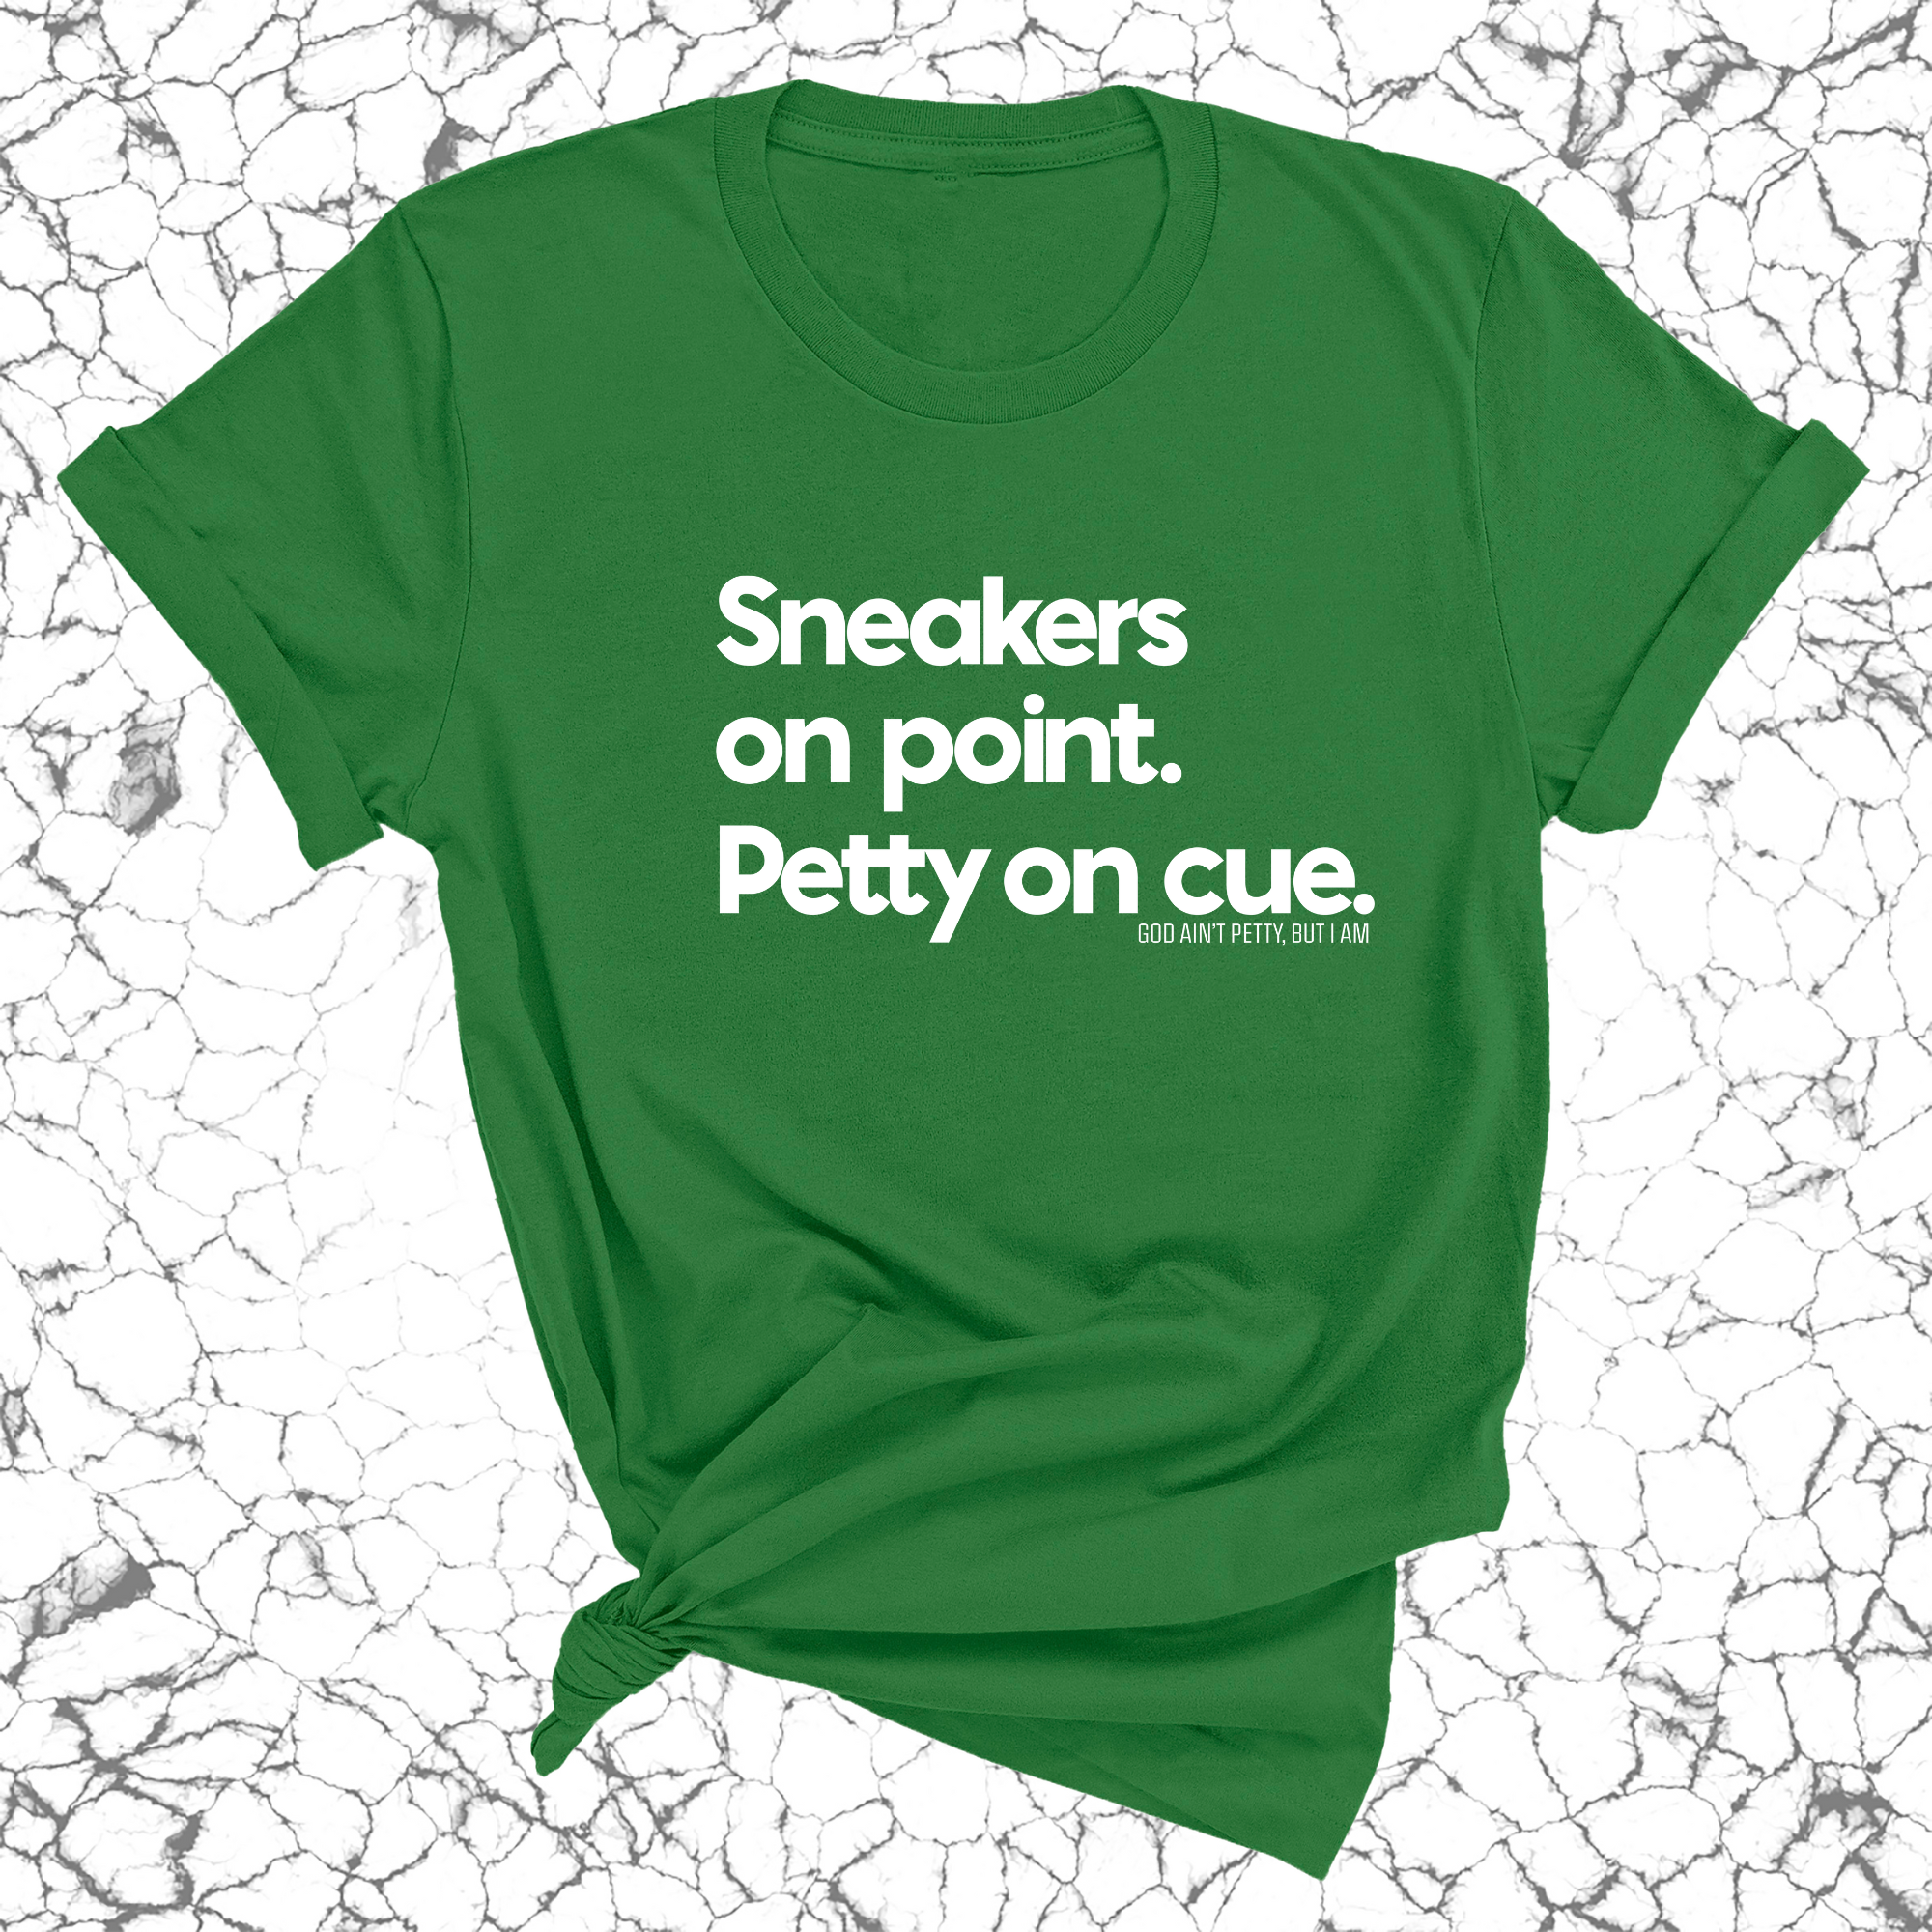 Sneakers on point. Petty On Cue Unisex Tee-T-Shirt-The Original God Ain't Petty But I Am